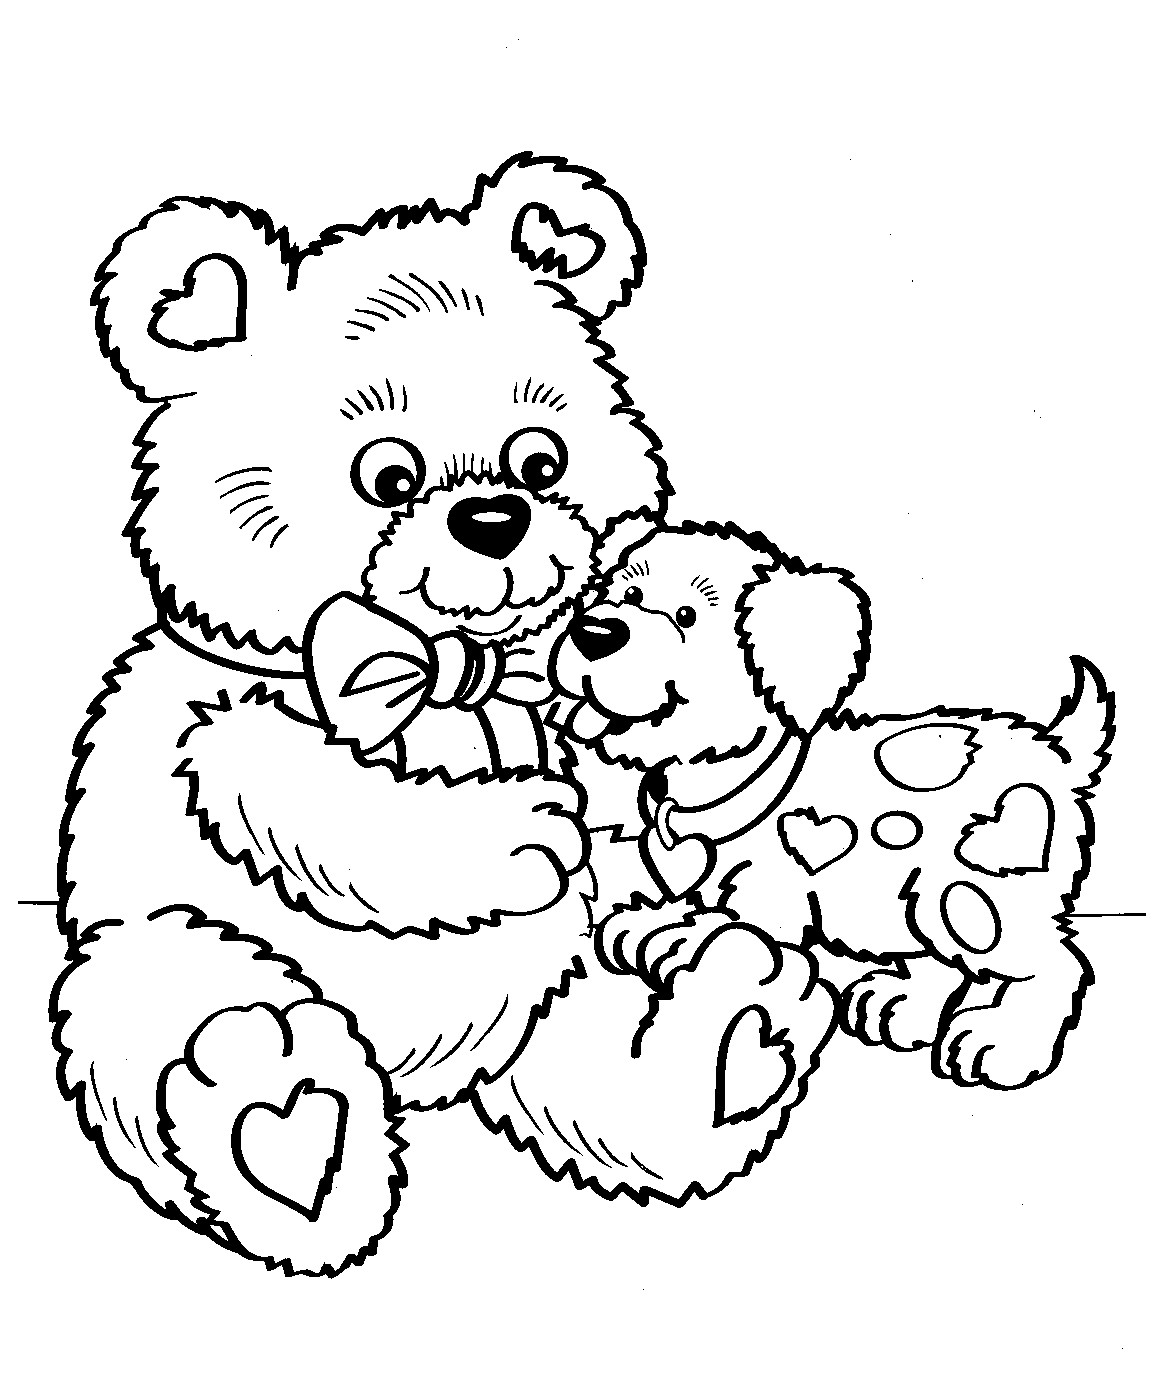 Valentines Day Coloring Pages Free Printable
 Coloring Pages Hearts Free Printable Coloring Pages for